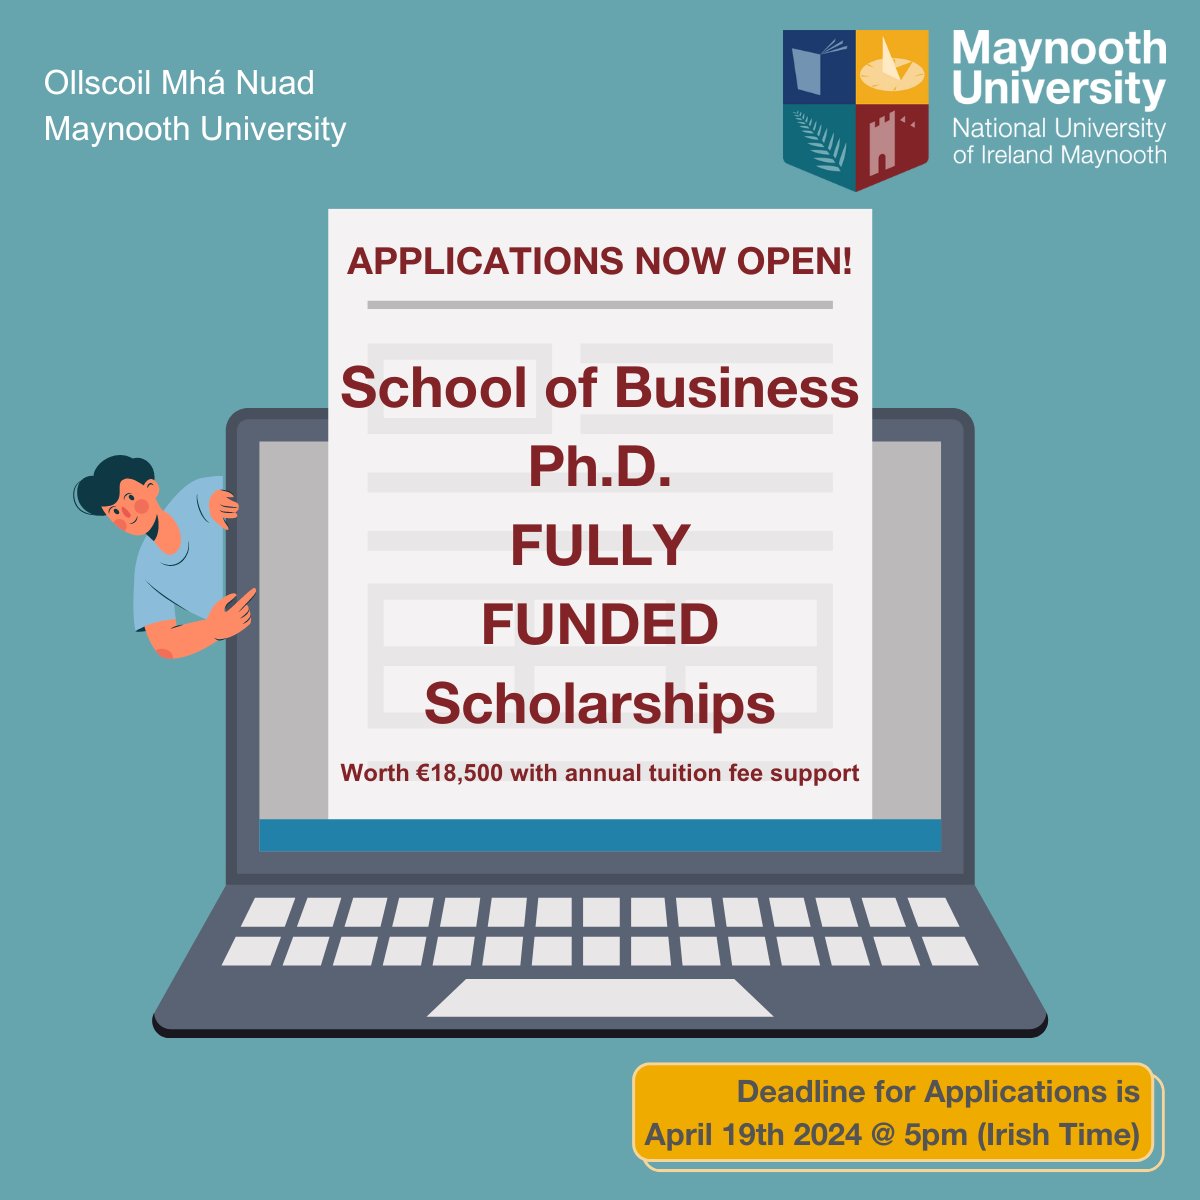 We are seeking applications from PhD candidates for fully funded PhD scholarships this year under the MU doctoral scholarship scheme. The deadline is 19/04/24. More information is provided in the detailed call document and application form here: encr.pw/lDfJe